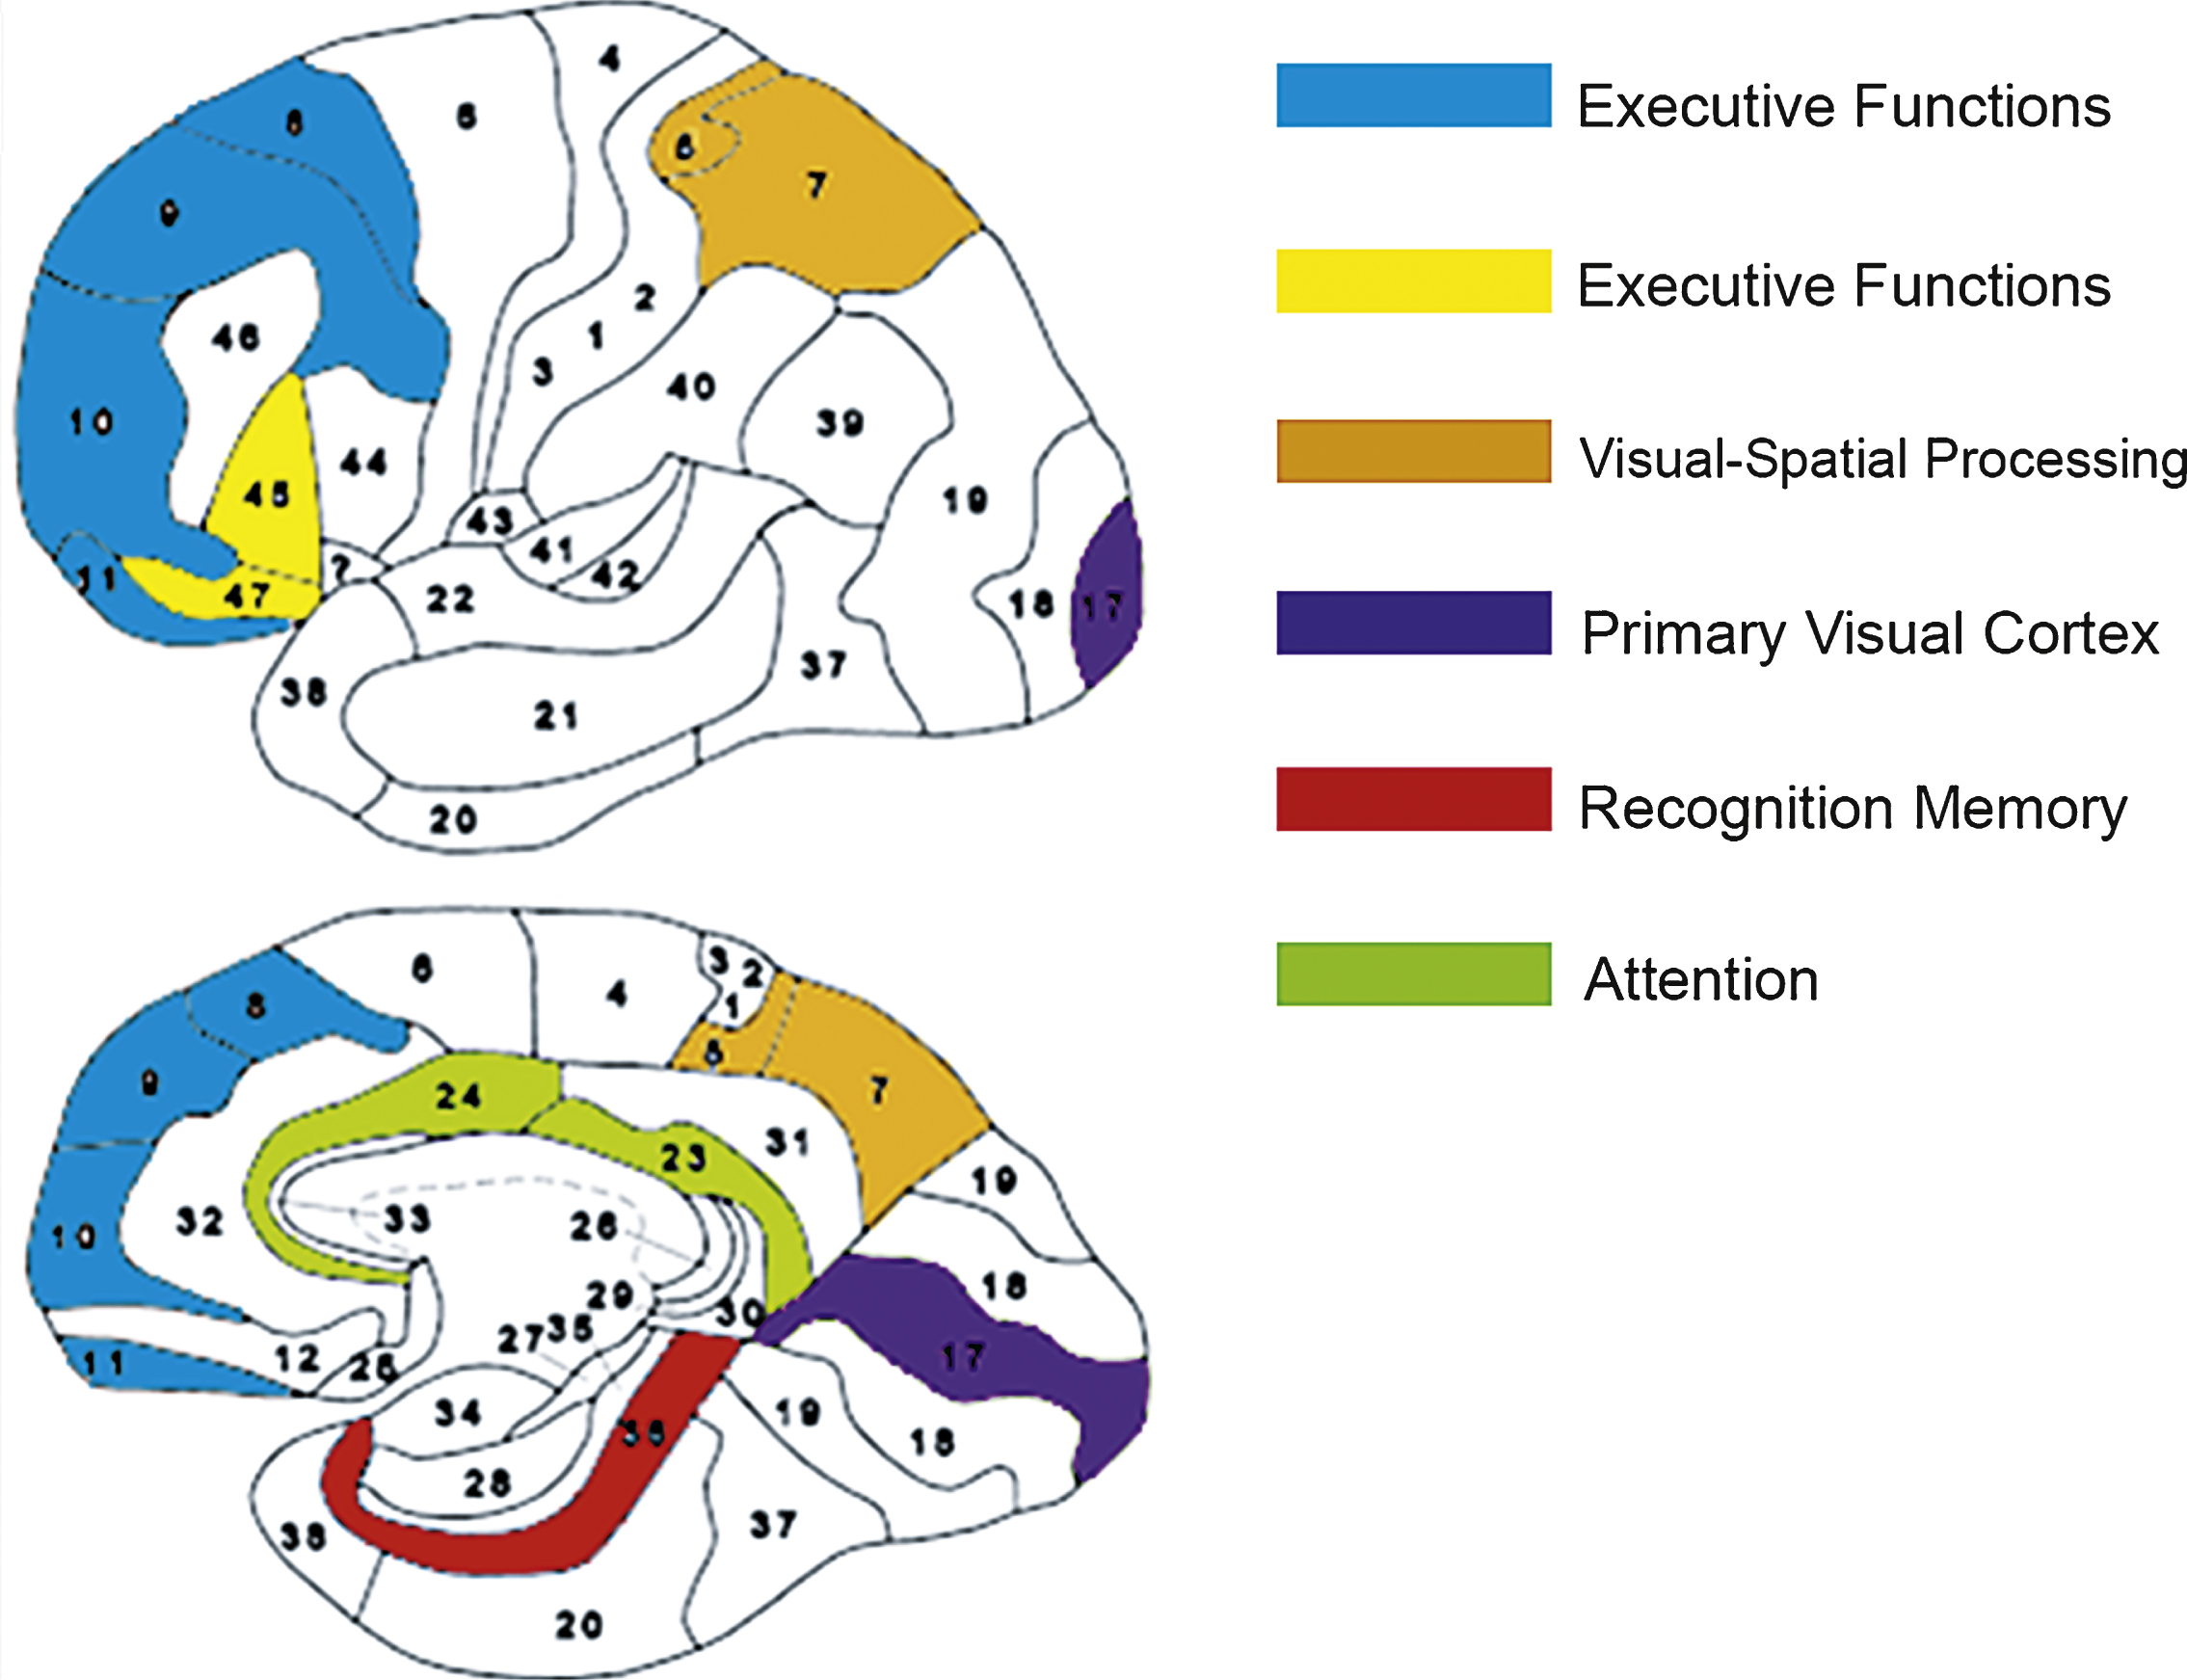 The Brodmann areas that were most improved after HBO2; perirhinal cortex (BA36) in red, the pre-frontal cortex (BA 8,9,10,11) in blue, inferior frontal gyrus (BA 45,47) in yellow, the anterior cingulate gyrus (BA 23,24) in green, primary visual cortex (BA 17) in purple and the parietal lobes (BA 5,7) in orange.